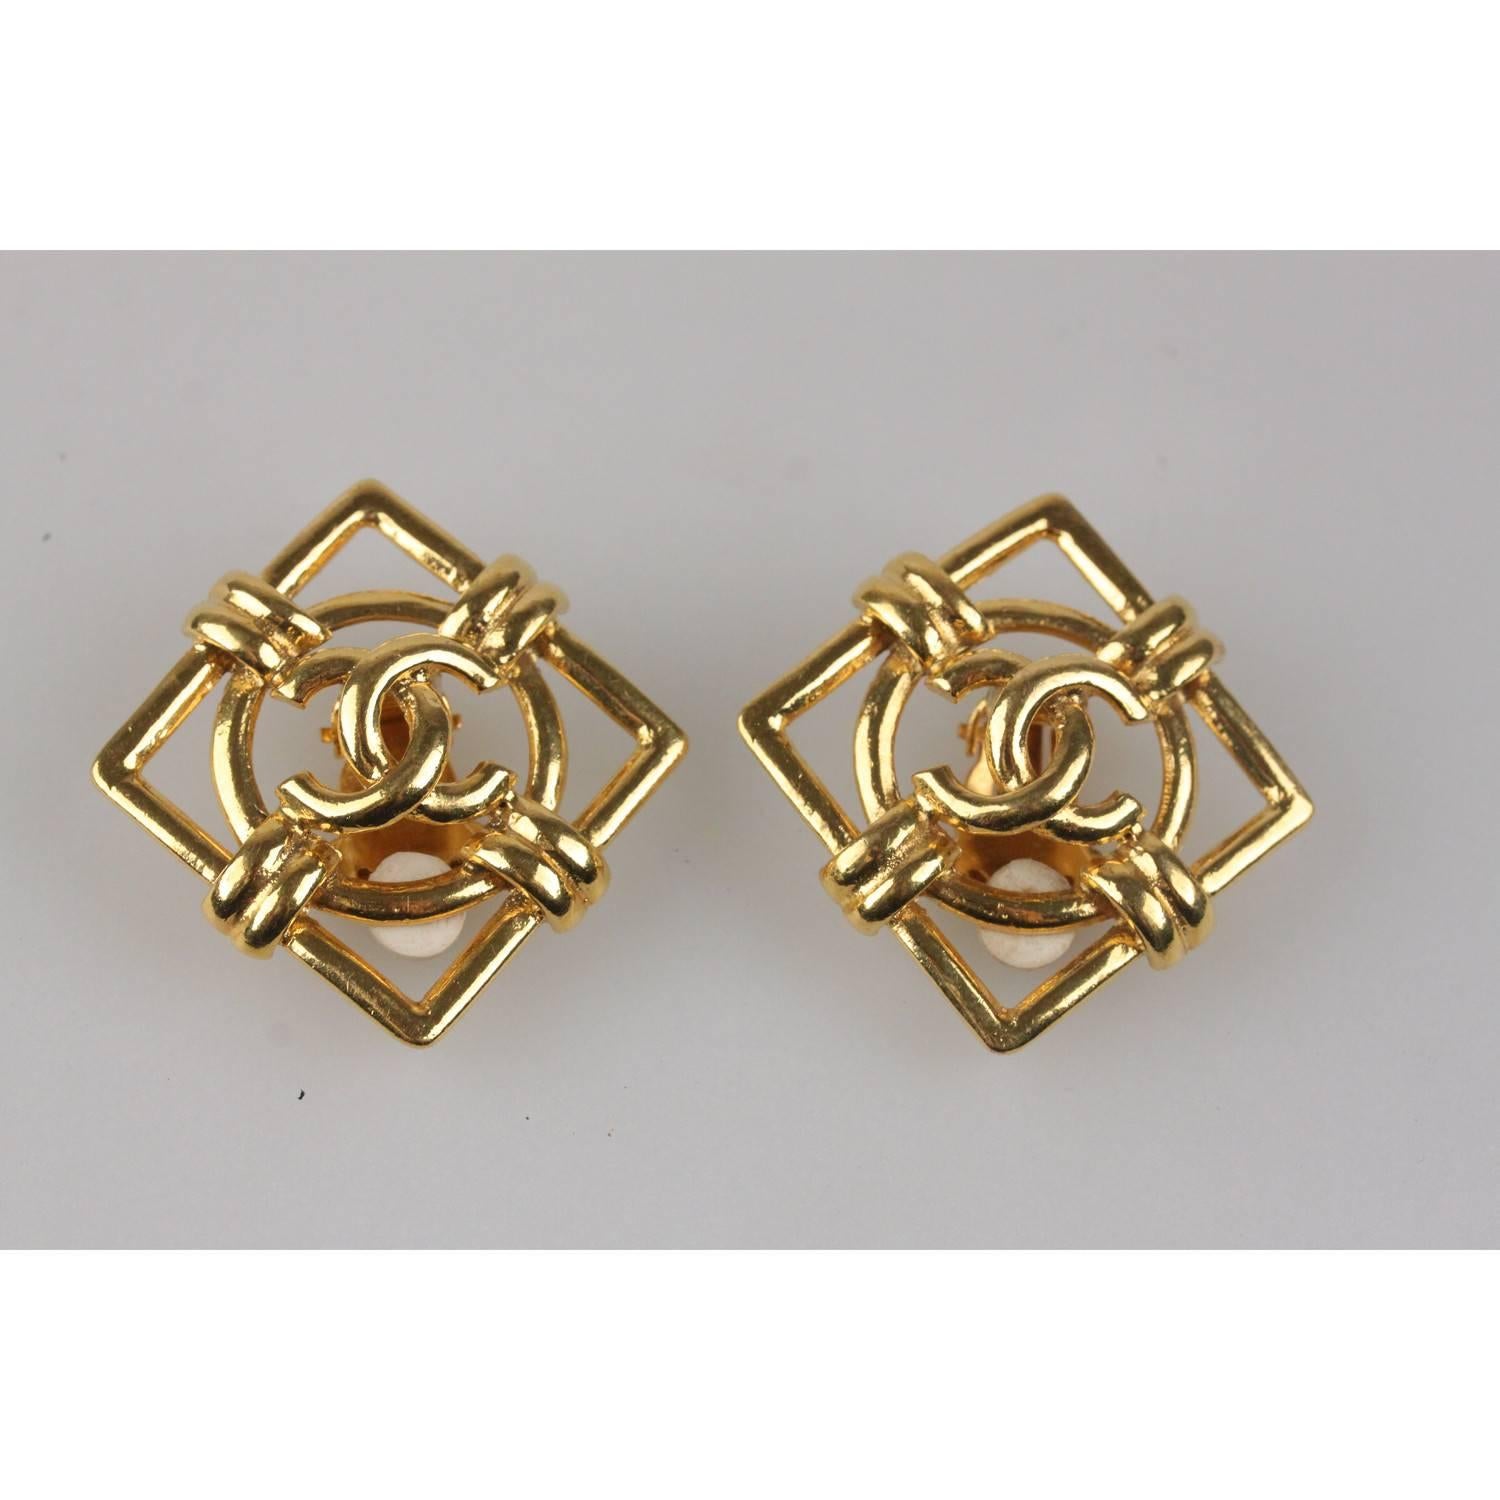 Vintage square clip on earrings in gold metal by CHANEL. 'CHANEL 2 - CC  - 9 -  Made in France' oval tag on the reverse of the earrings.